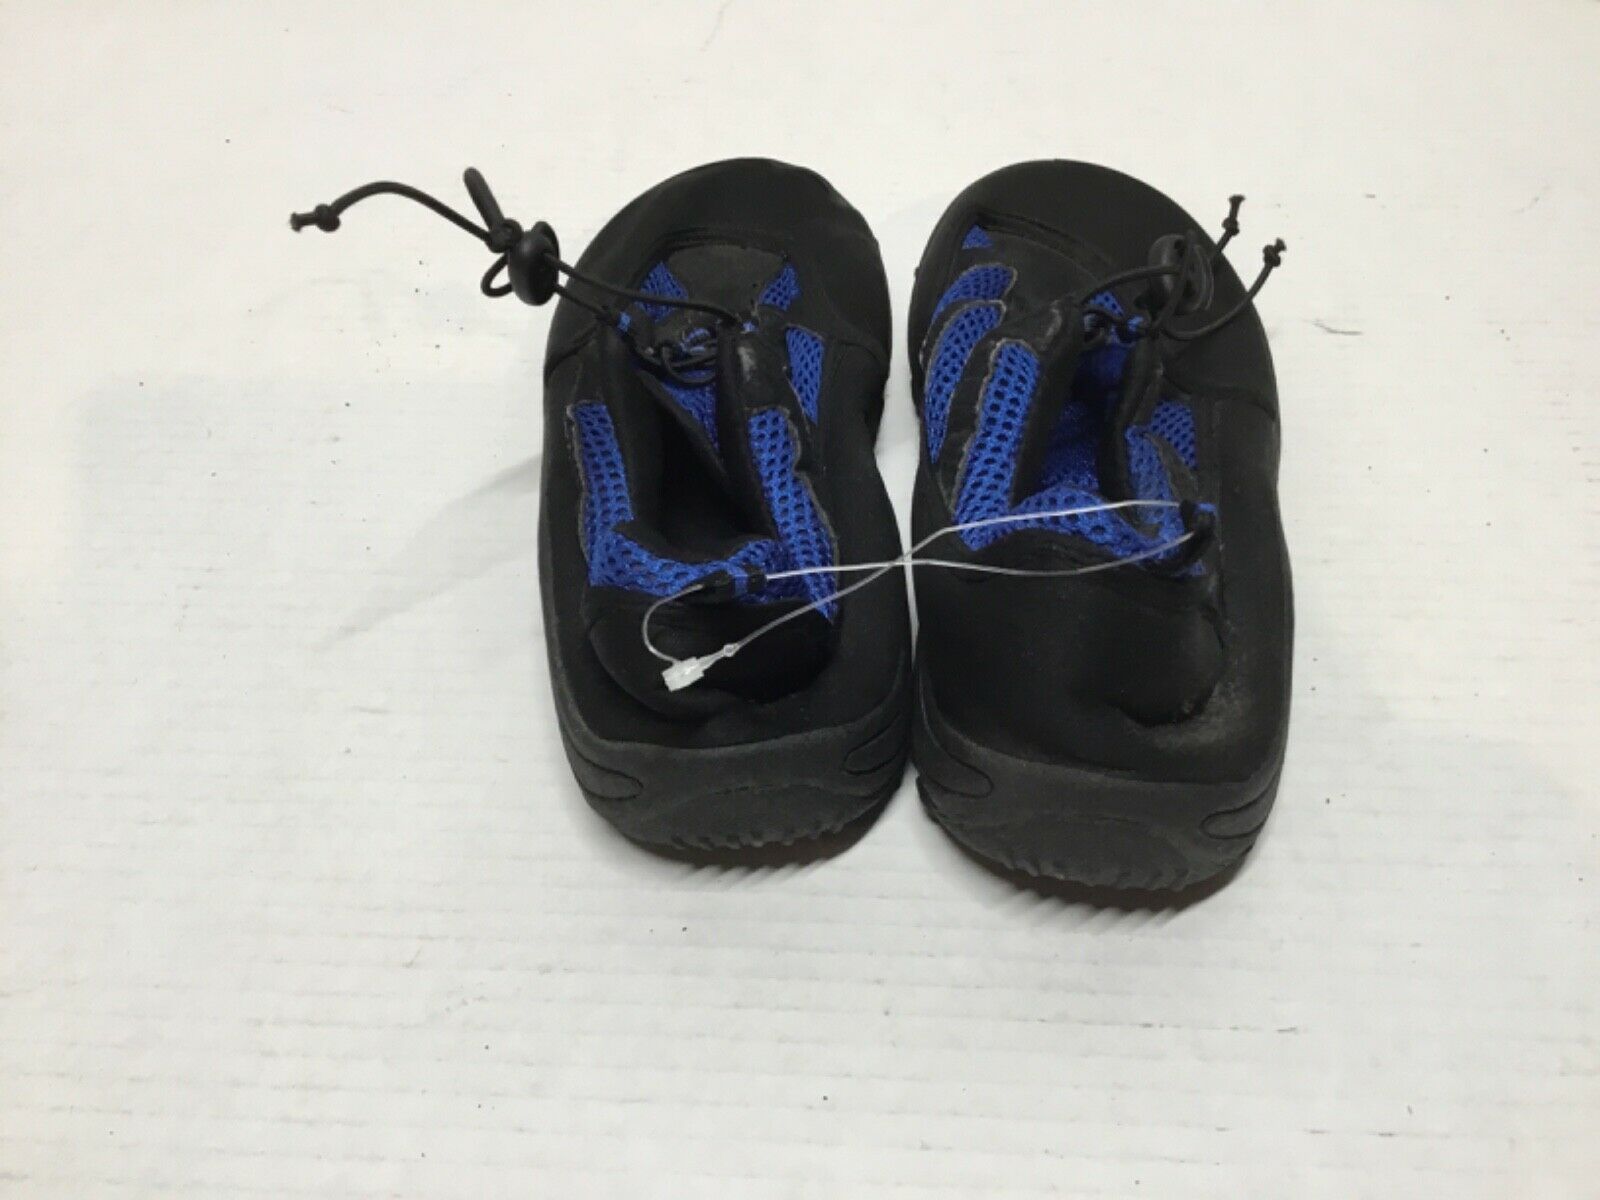 Sand N Sun Black And Blue Water Shoes Size 4 and 50 similar items